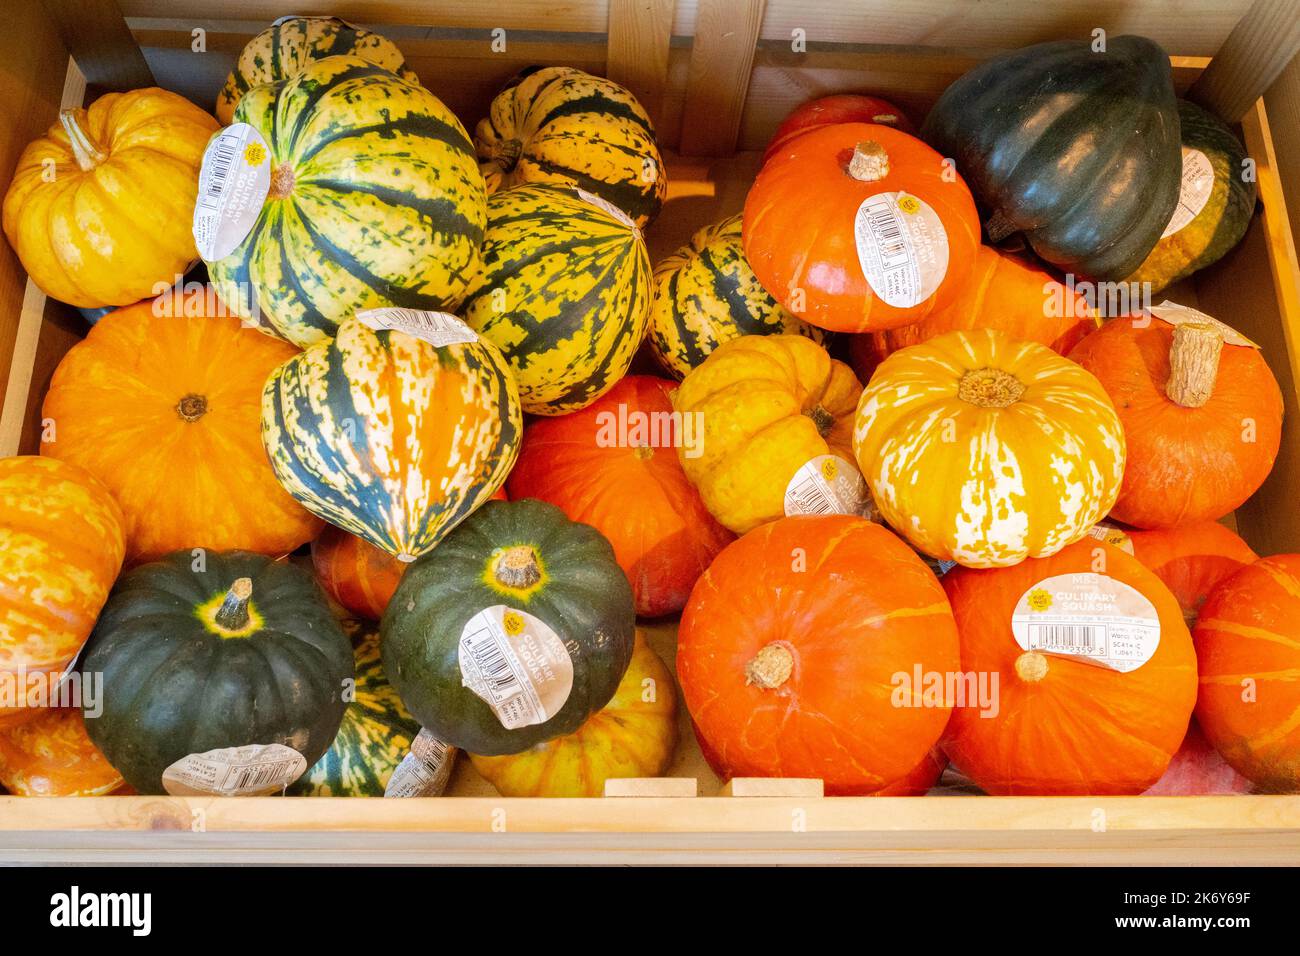 A display of the many types of coloured culinary squashes for sale in a grocers shop for Halloween Stock Photo